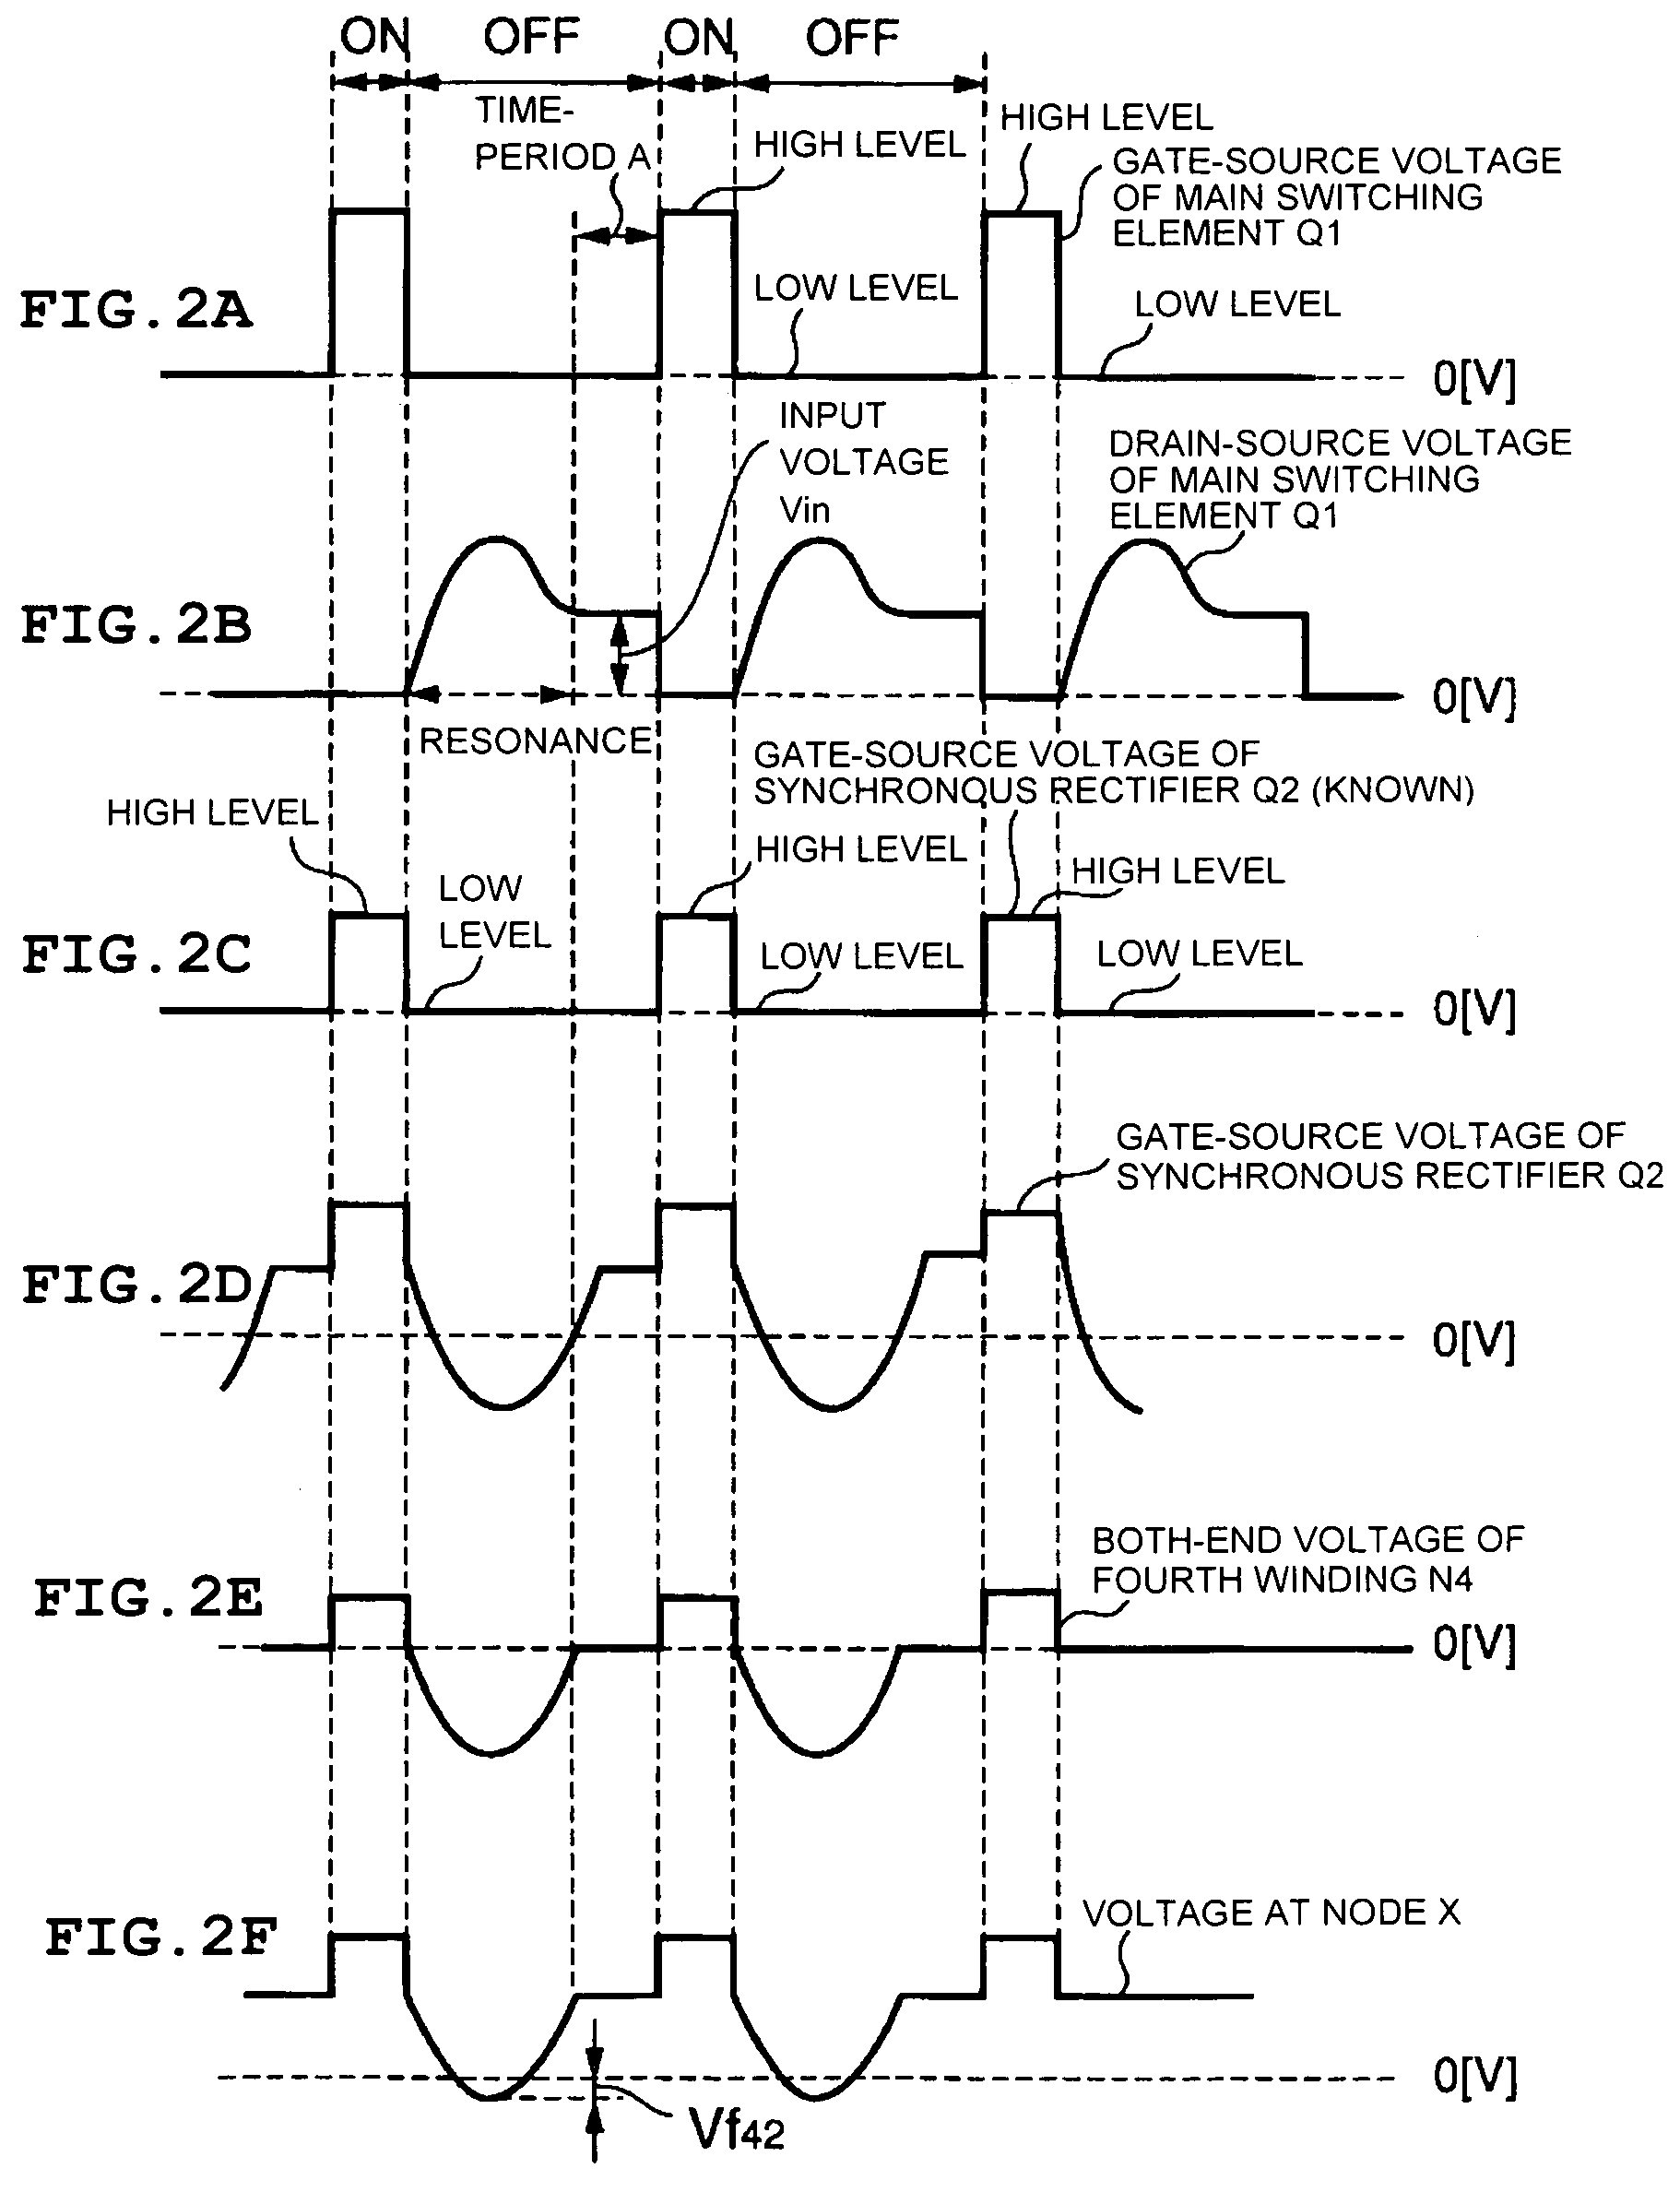 Switching electric source device